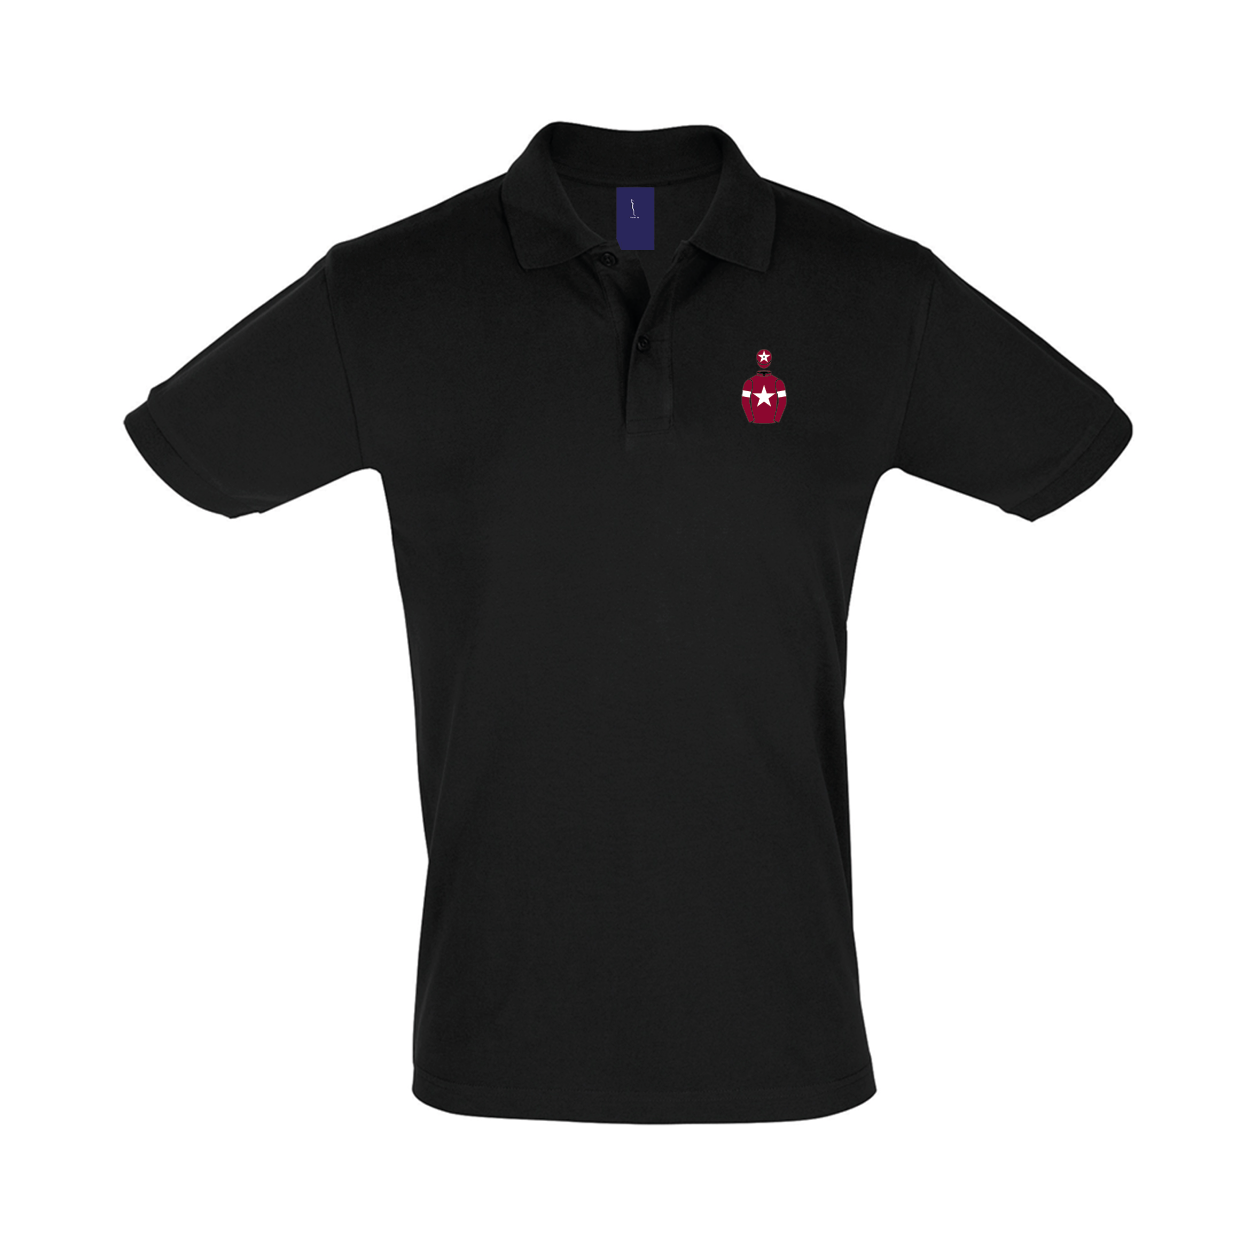 Ladies Gigginstown Stud Embroidered Polo Shirt - Clothing - Hacked Up